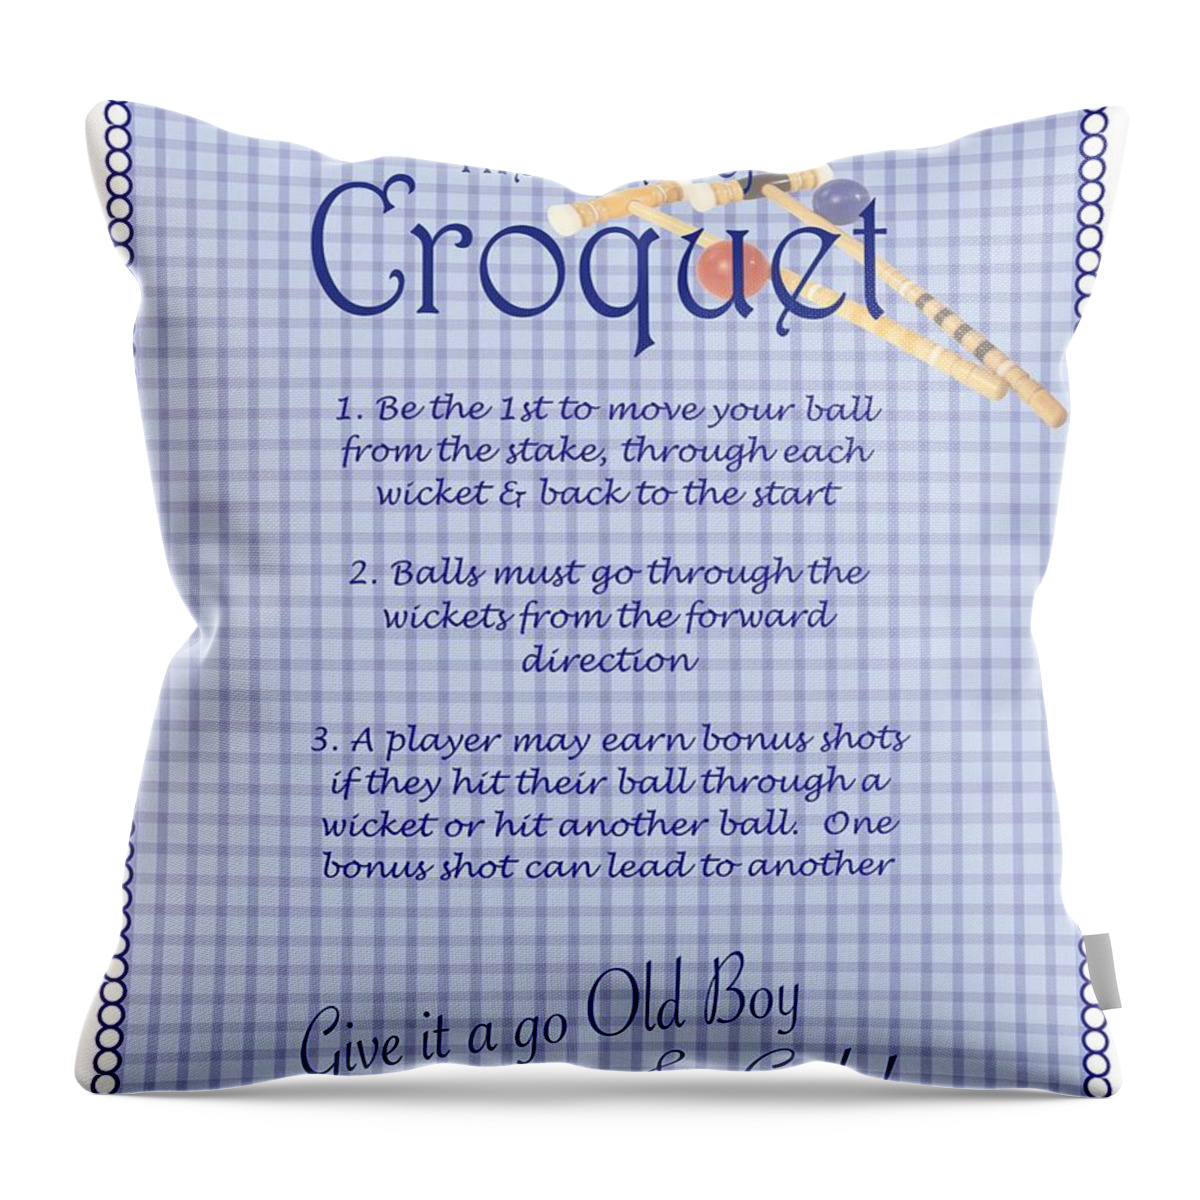 Croquet Poster Throw Pillow featuring the digital art Croquet Rules by Nancy Patterson